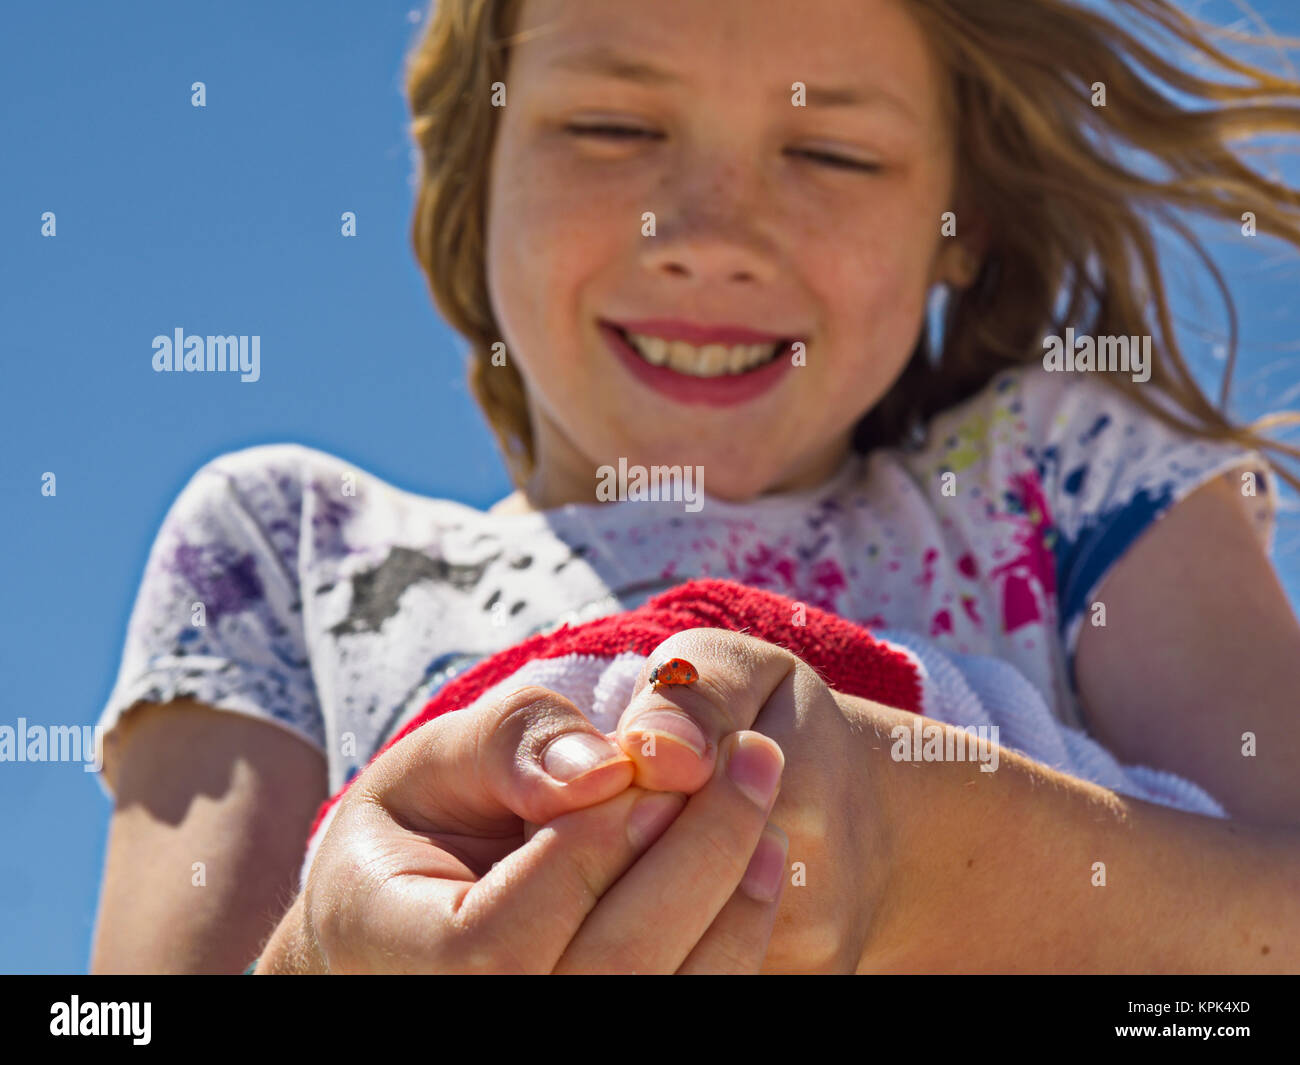 A young girl shows off a ladybug (Coccinellidae) she caught and is holding on her thumb; Destin, Florida, United States of America Stock Photo